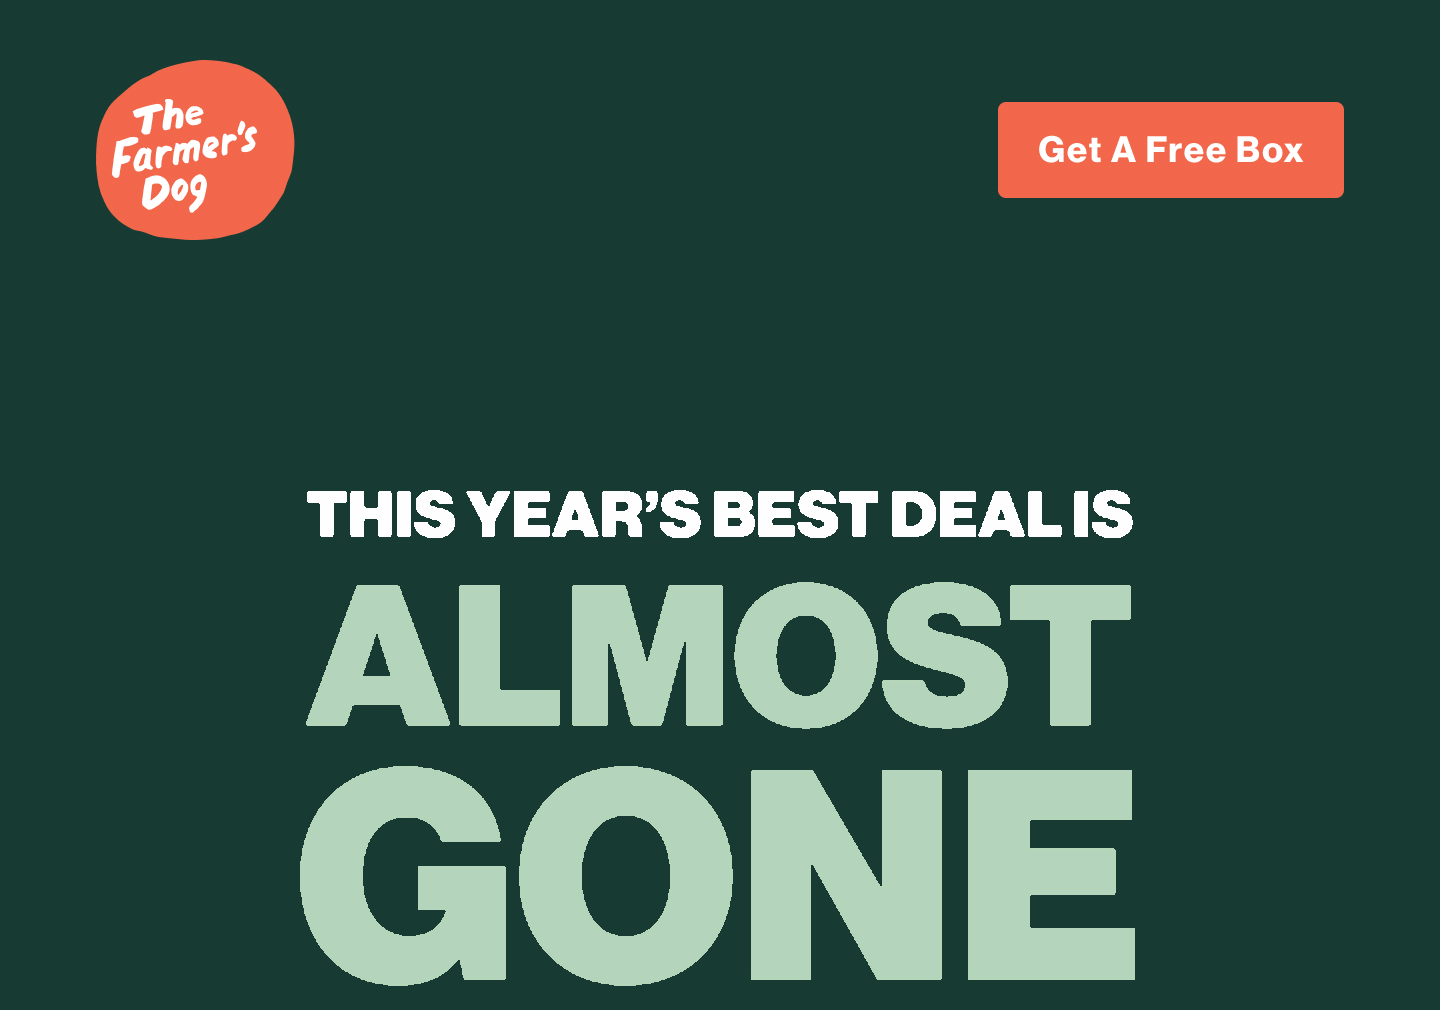 This year's best deal is almost gone.